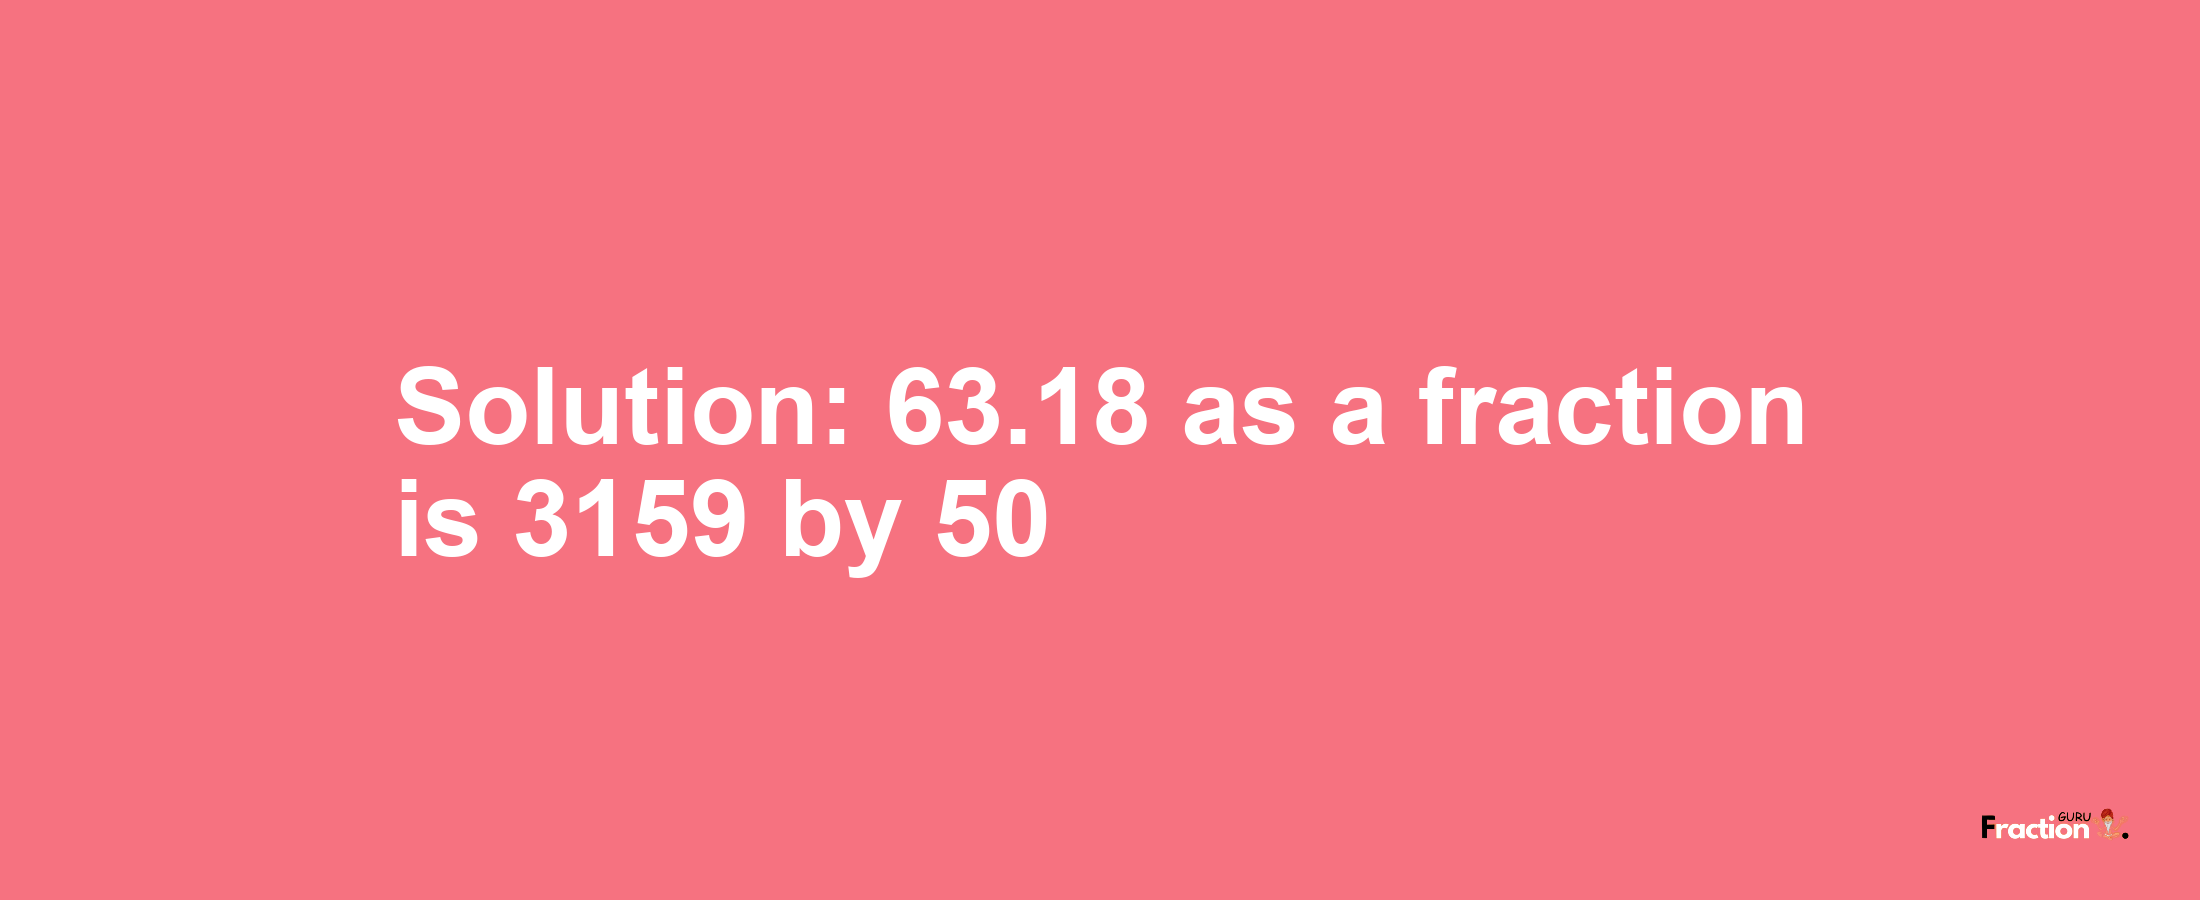 Solution:63.18 as a fraction is 3159/50